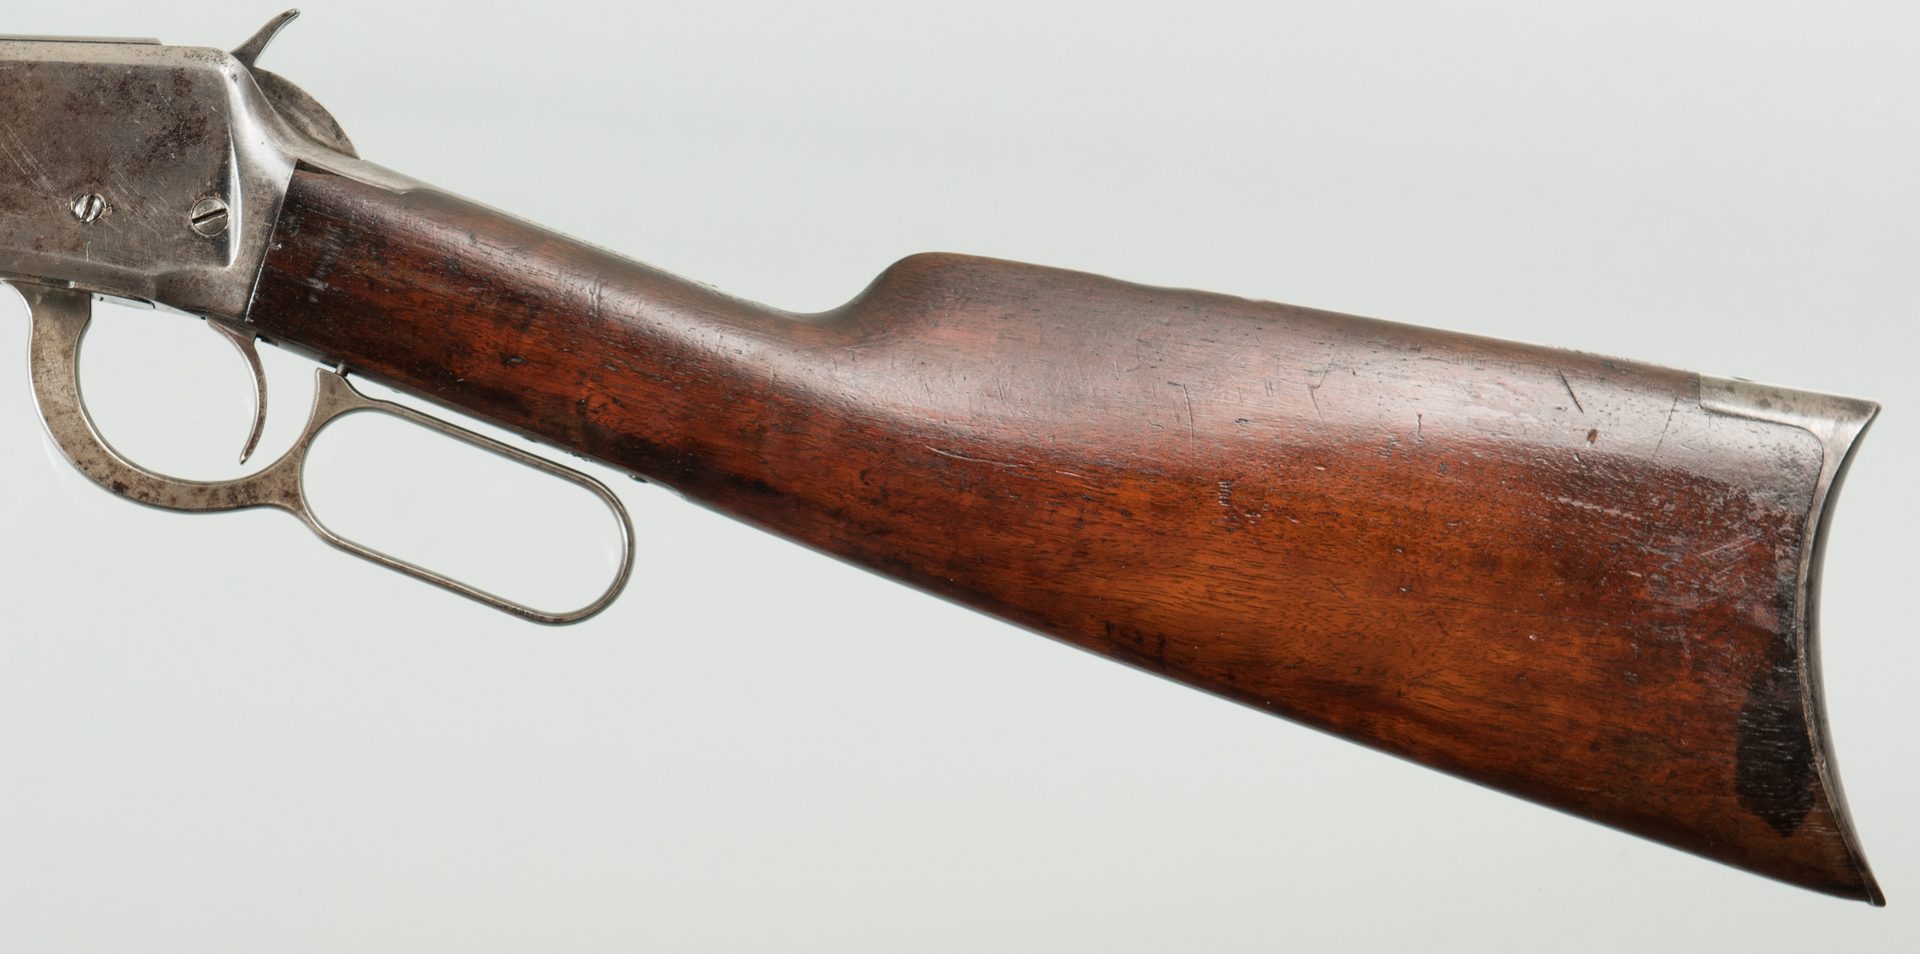 Lot 809: Winchester Model 1894 38-55 Win Lever Action Rifle